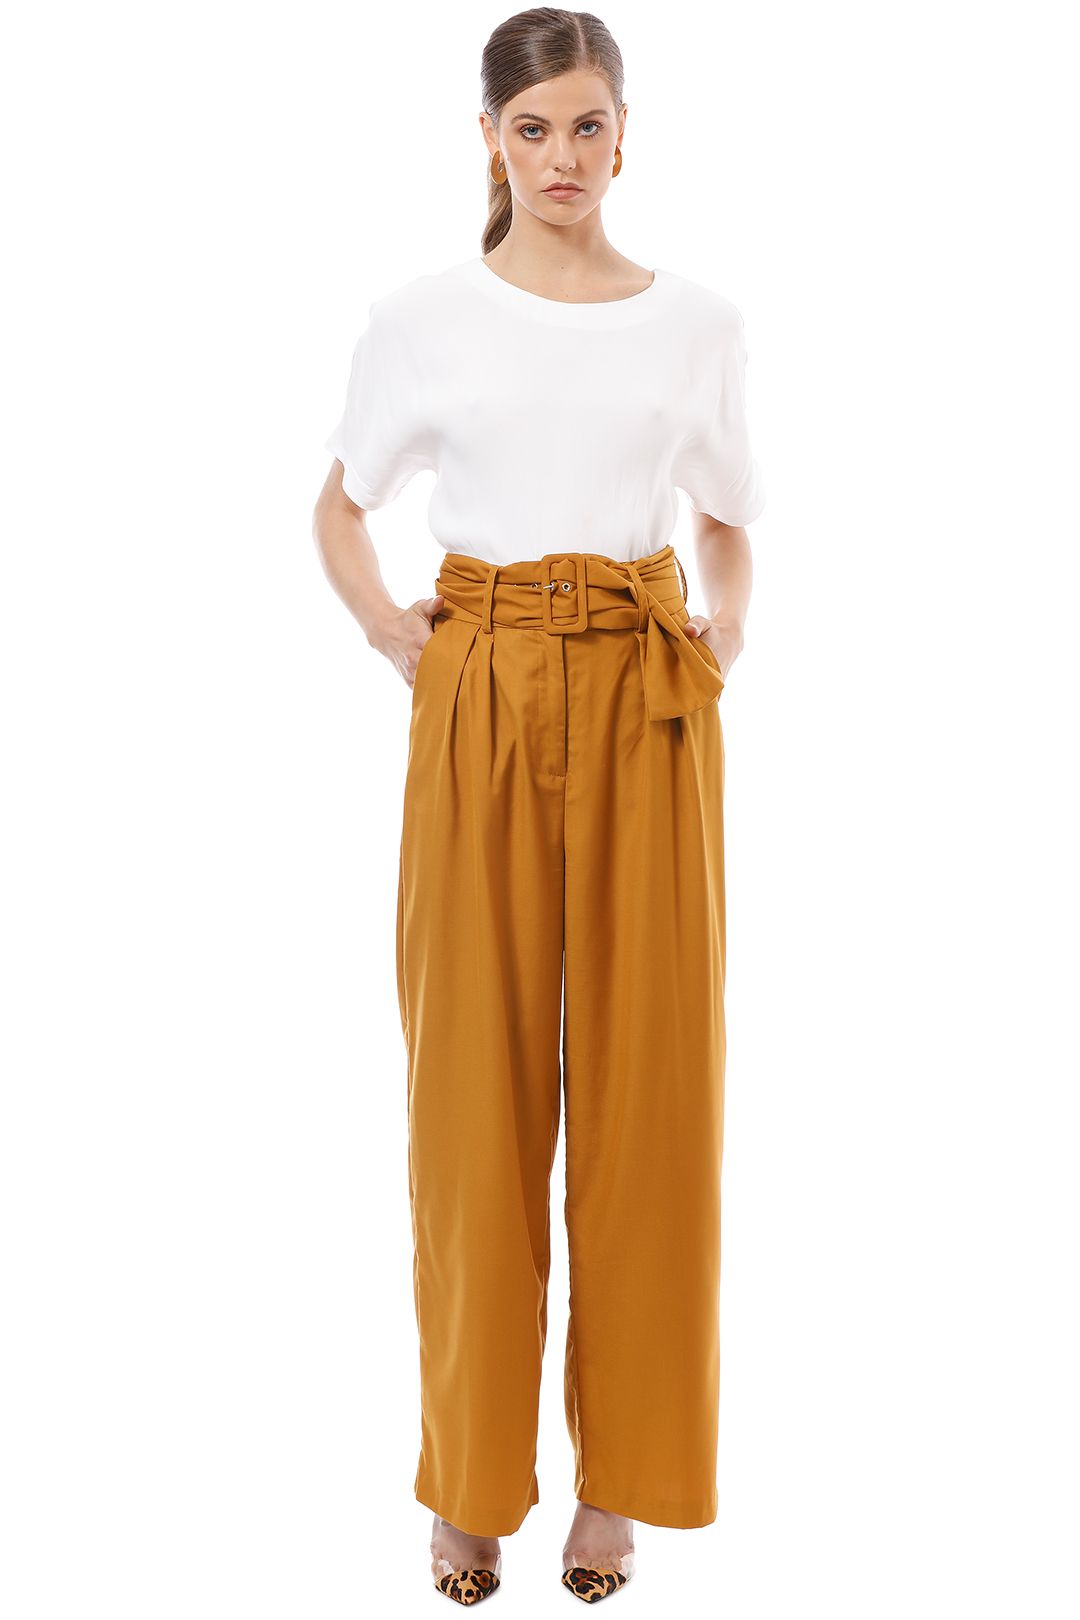 CMEO Collective - The Moments Pant - Yellow - Front